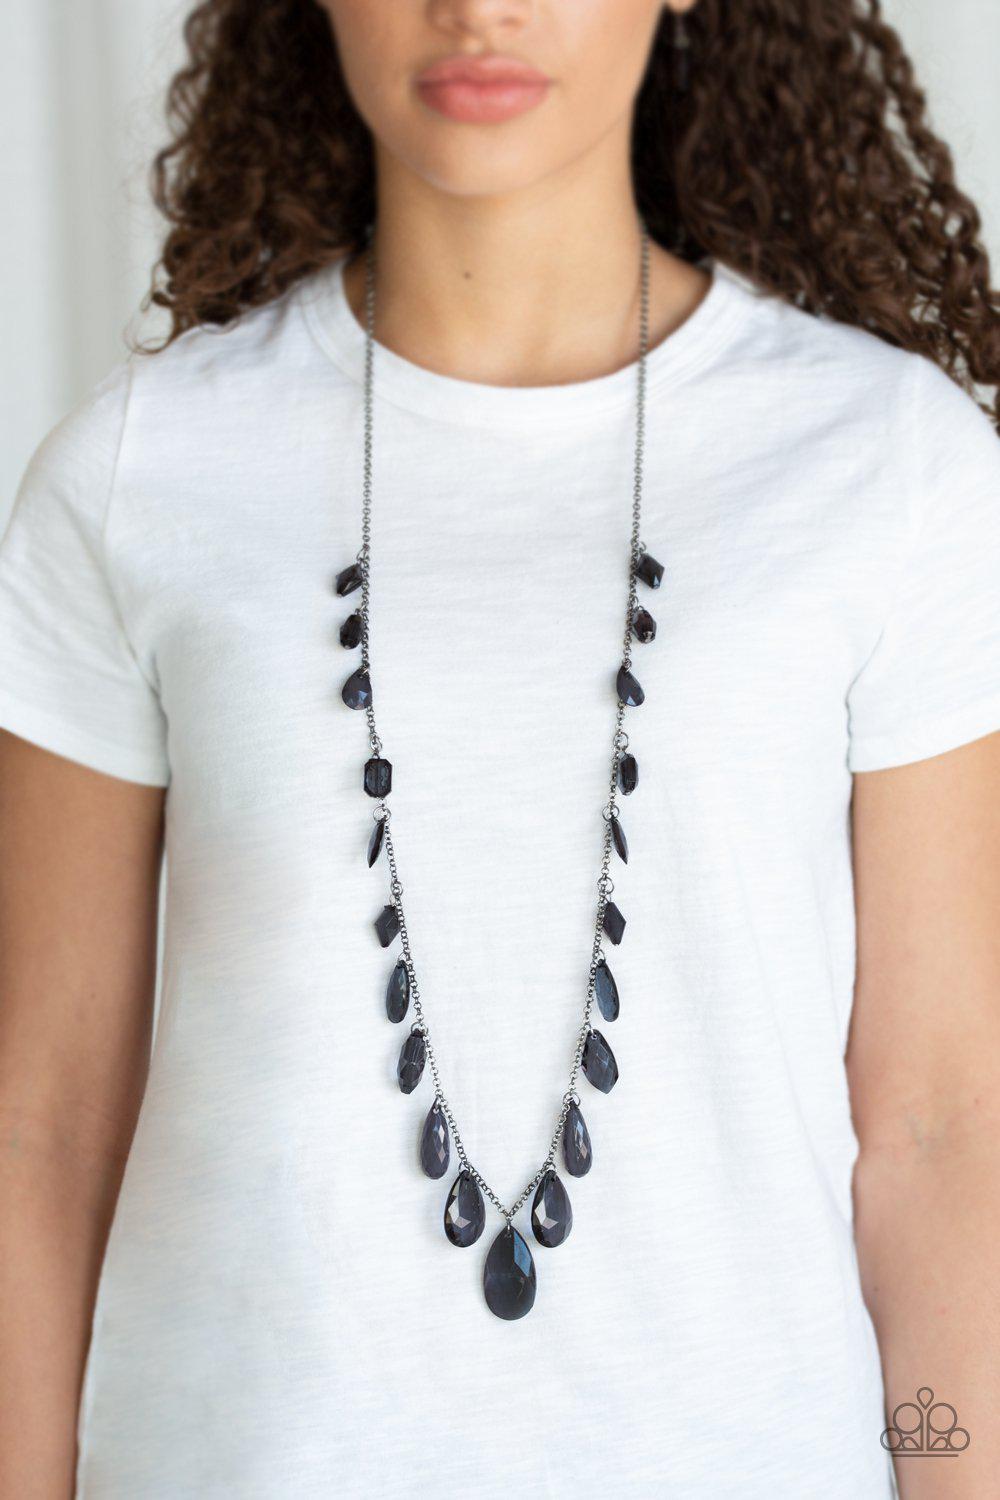 GLOW And Steady Wins The Race Black Necklace - Paparazzi Accessories-CarasShop.com - $5 Jewelry by Cara Jewels